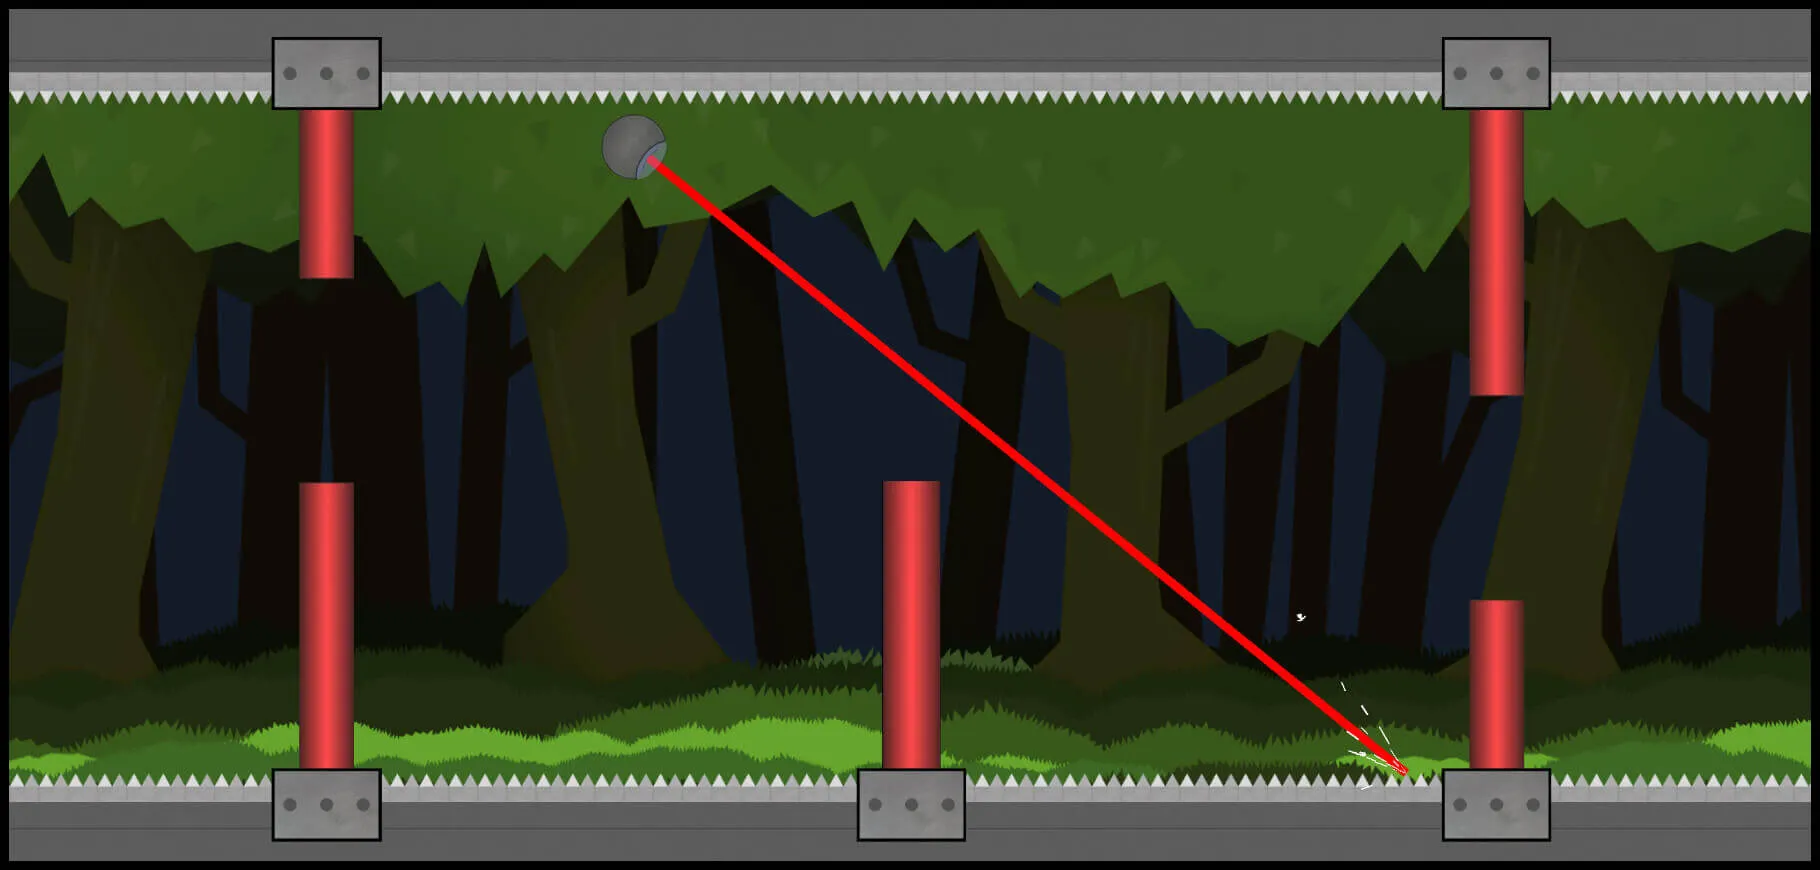 watch your back level screenshot from the game reflex runner.